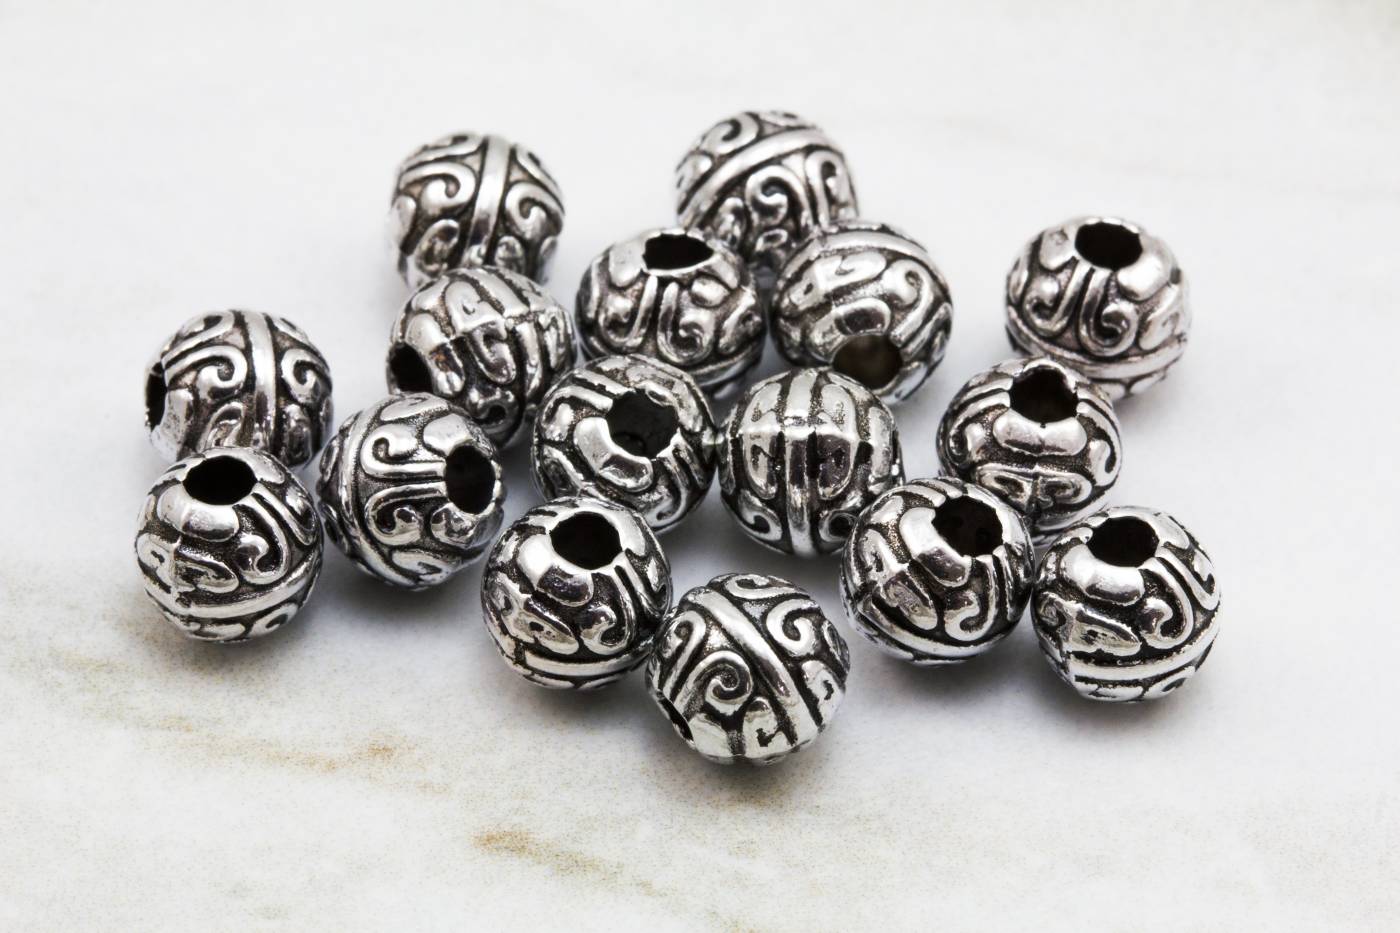 8mm-metal-round-ball-silver-beads